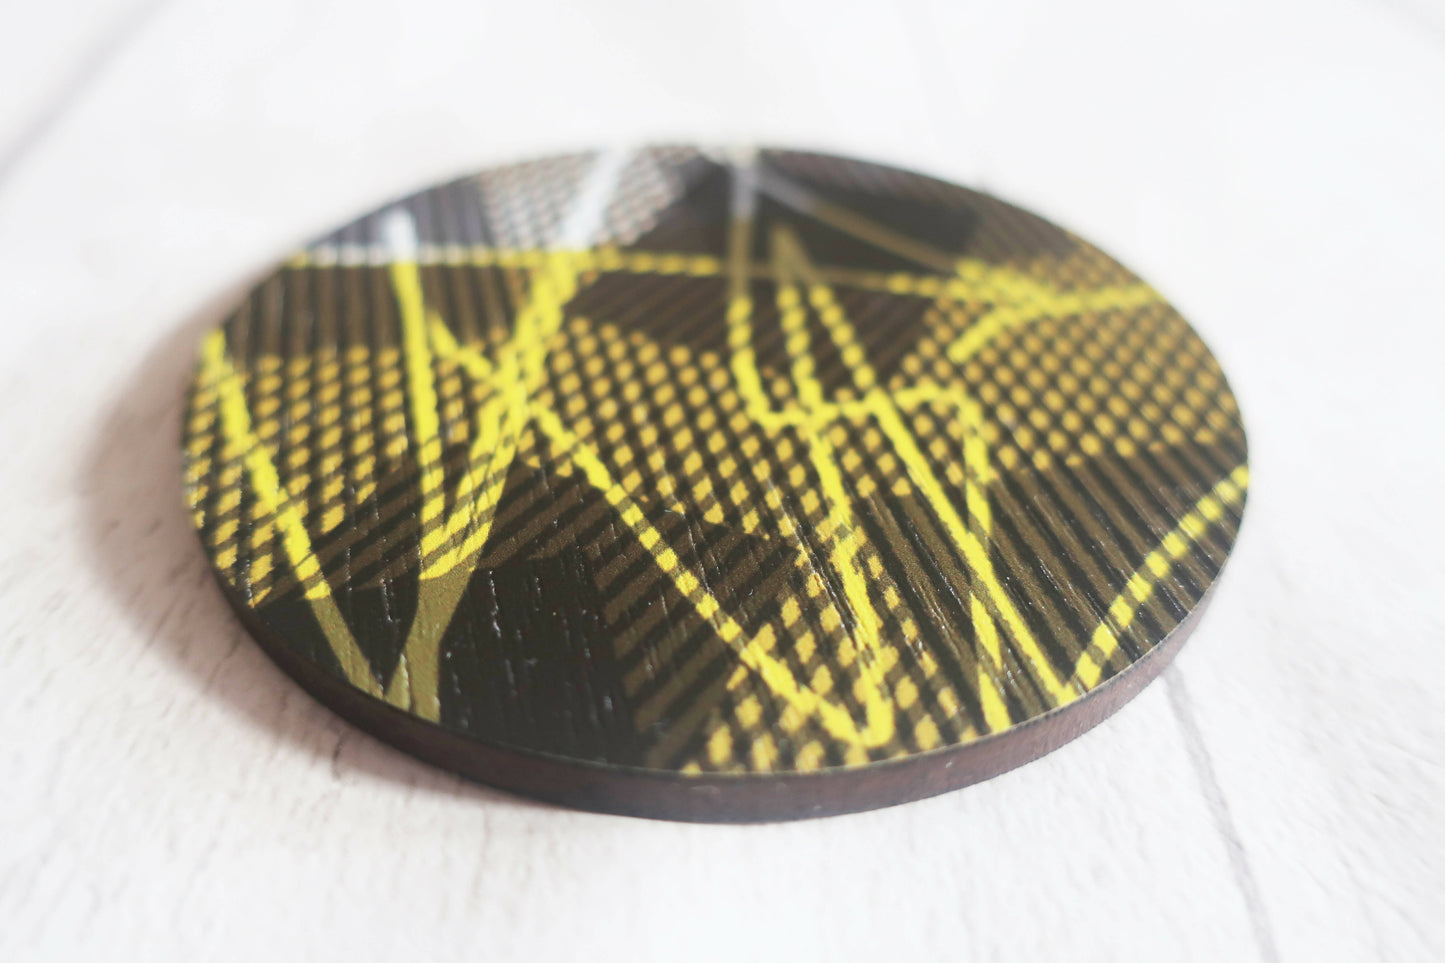 Large statement graphic brooch, yellow and black printed pin